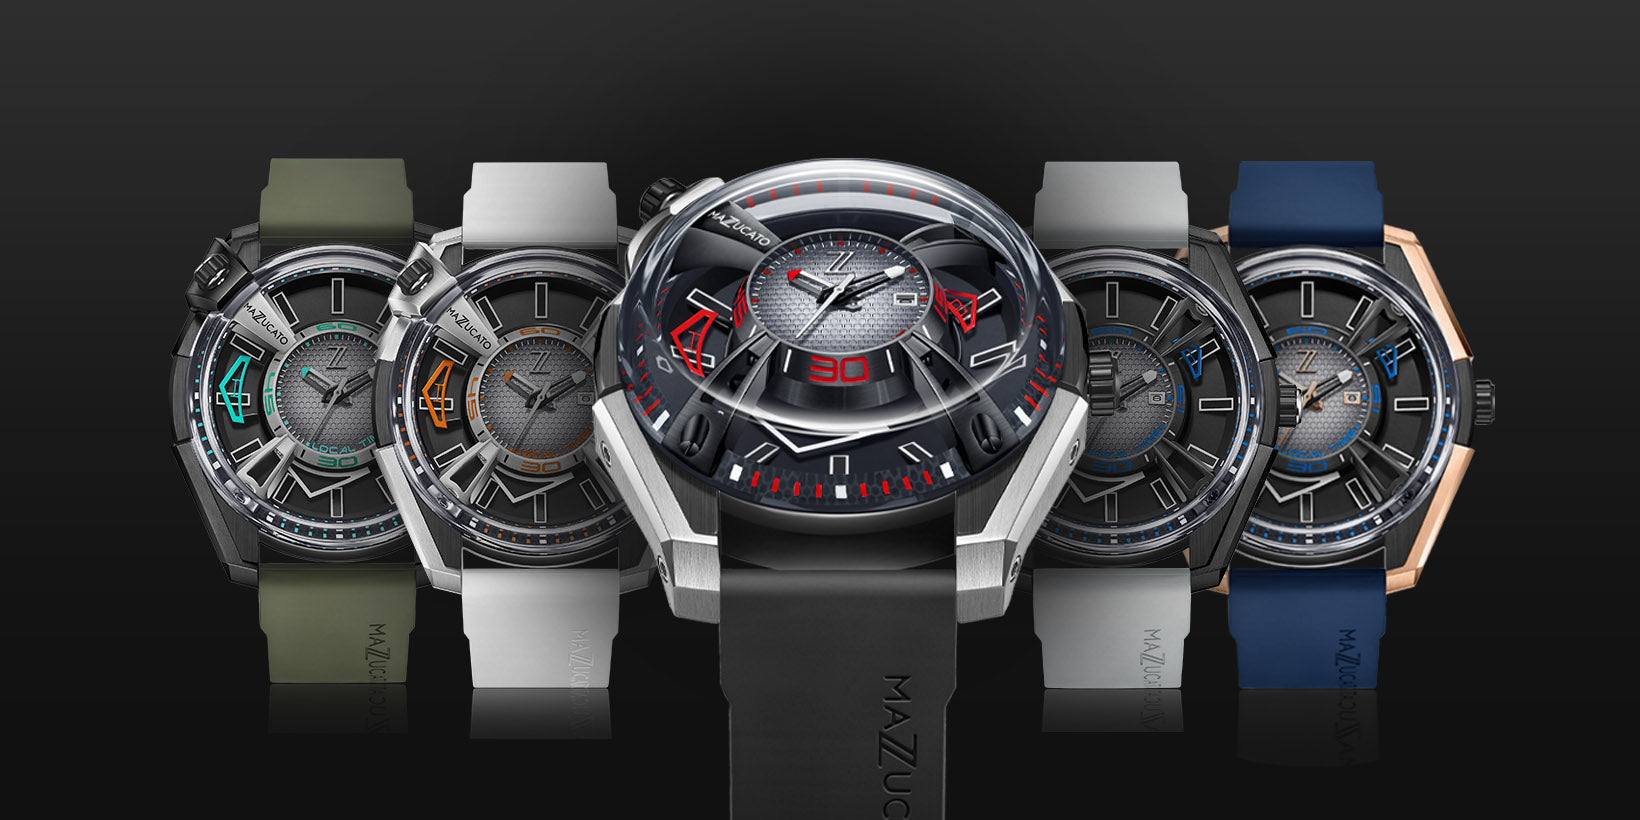 Introducing the Mazzucato LAX: A Revolutionary Watch Design